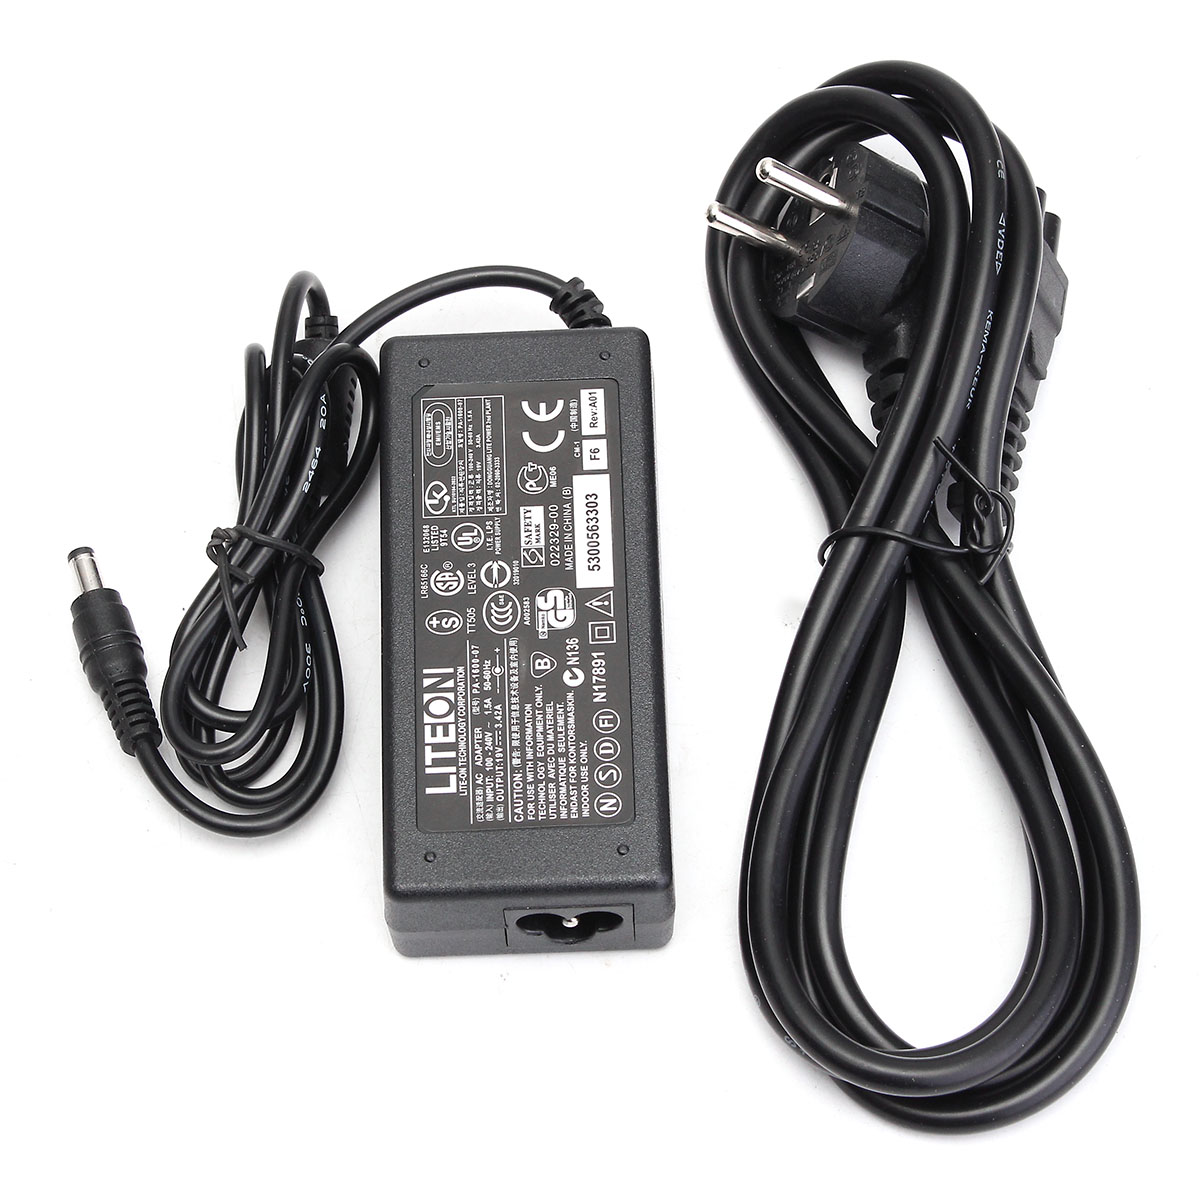 DC-19V-342A--Power-Adapter-Universal-Power-Supply-Charger-USEU-Plug-1363367-4